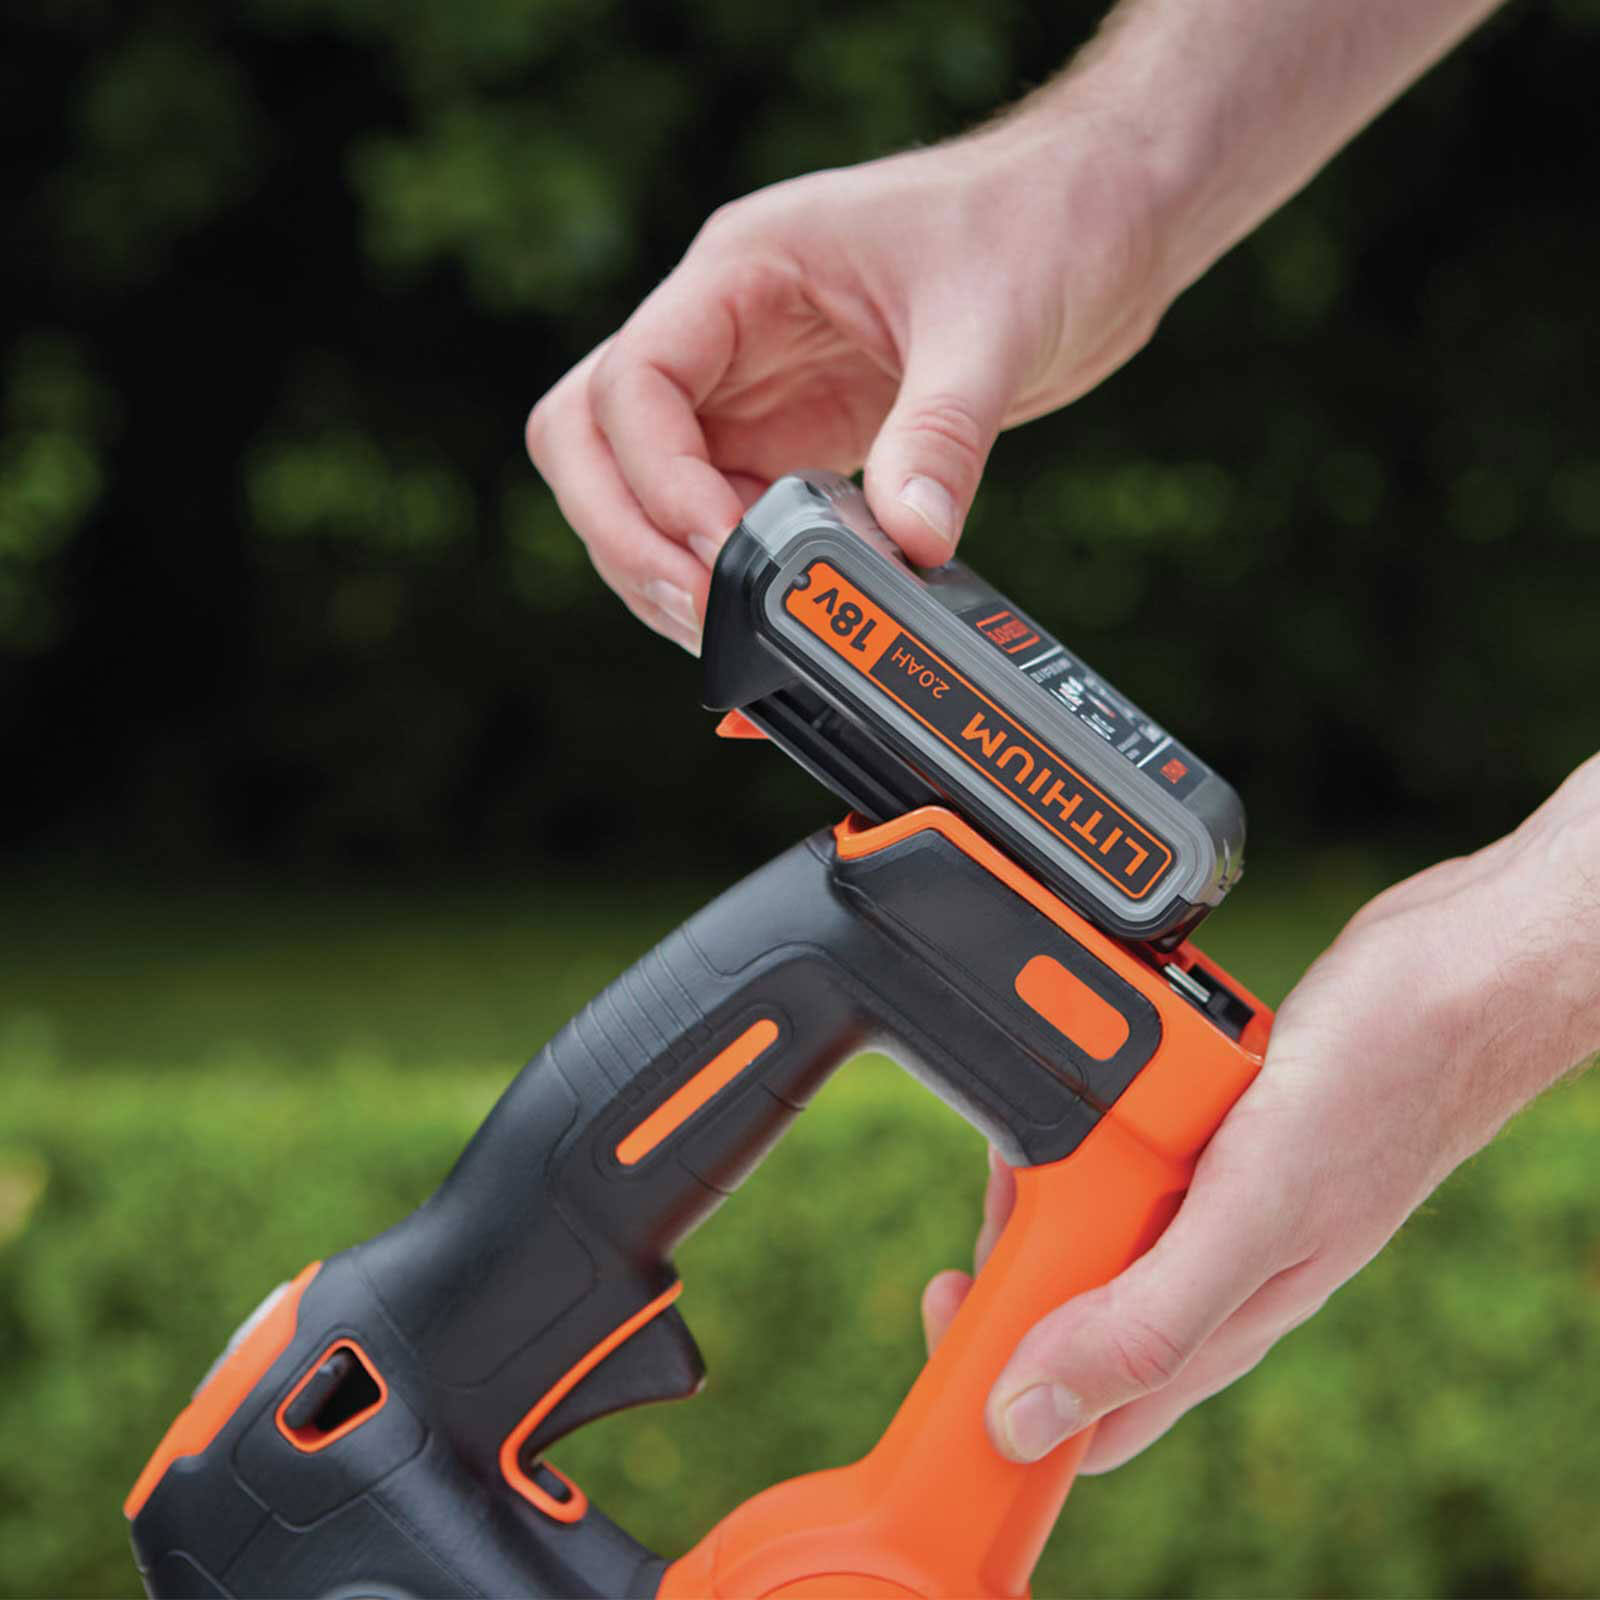 b&d cordless hedge trimmer